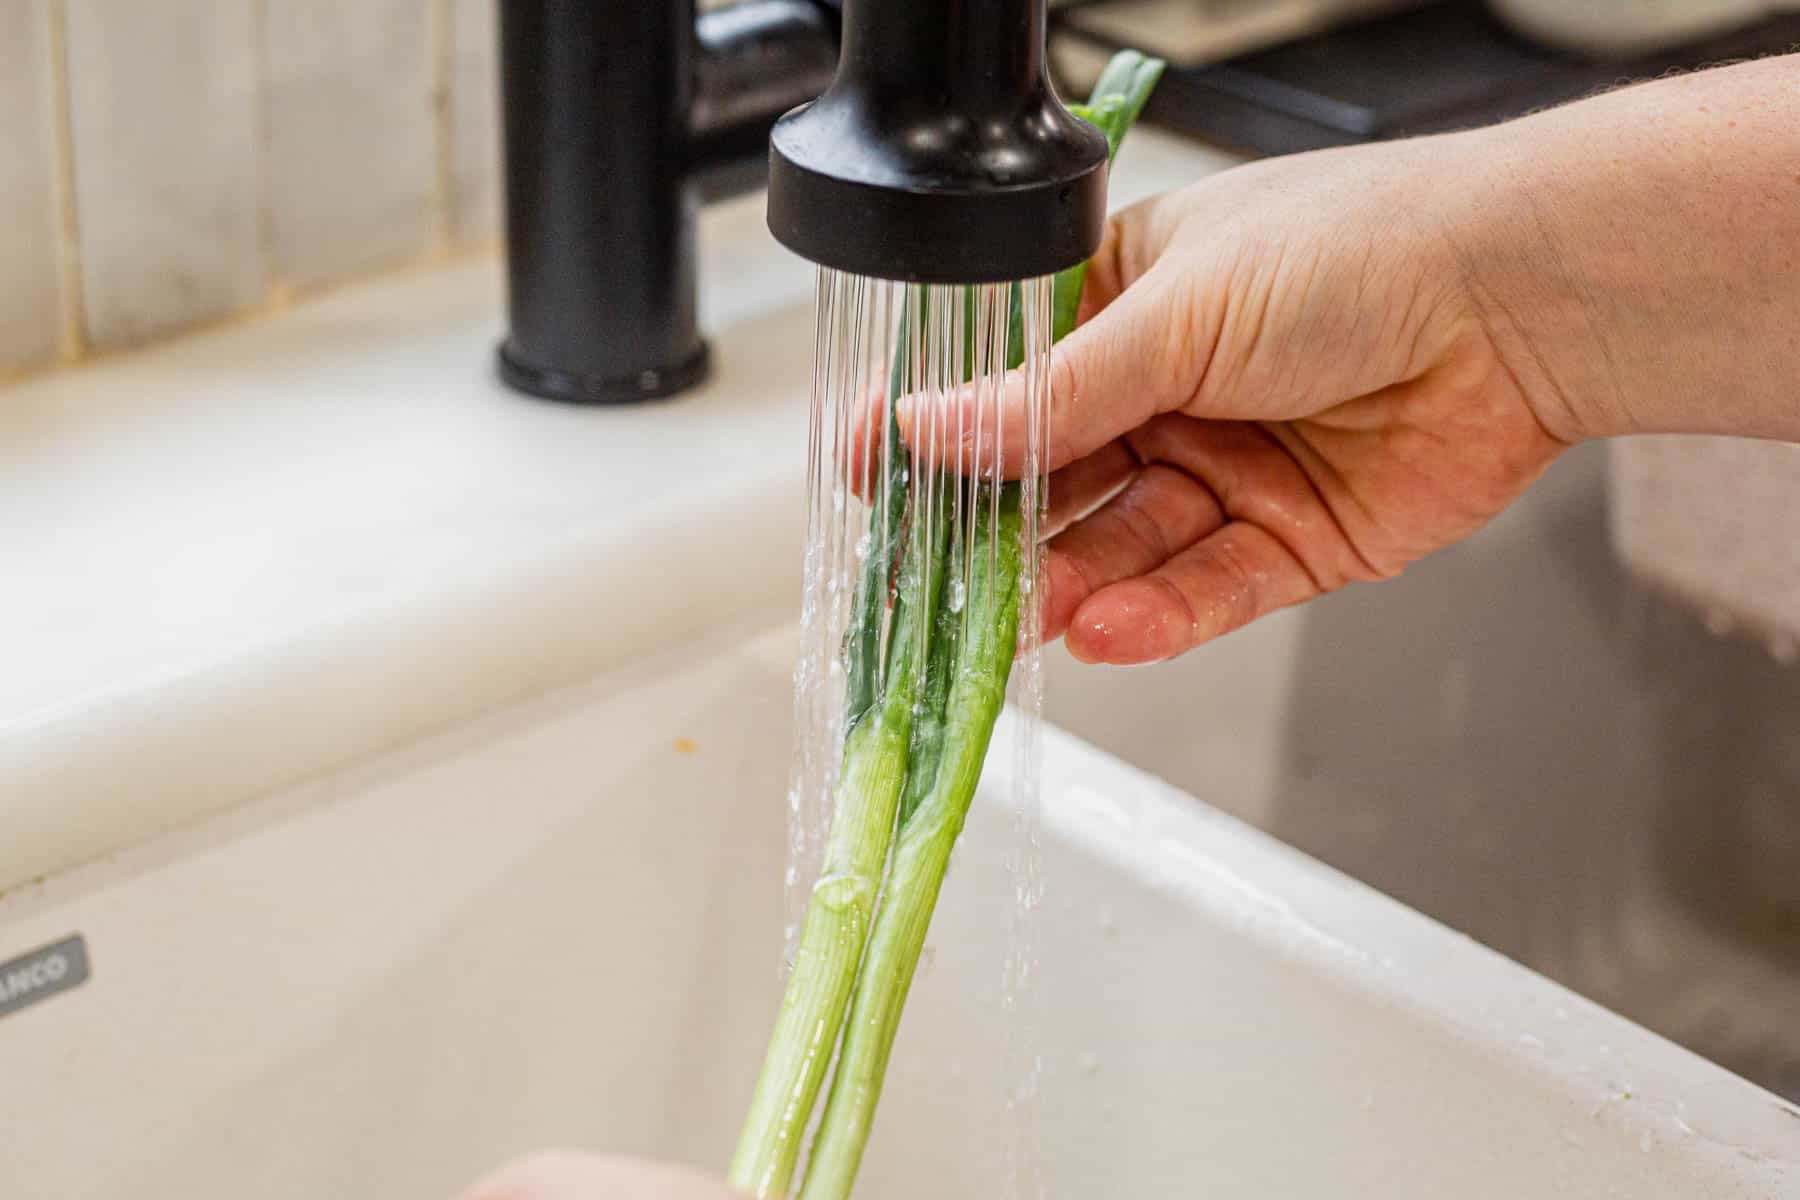 rinsing green onions under water